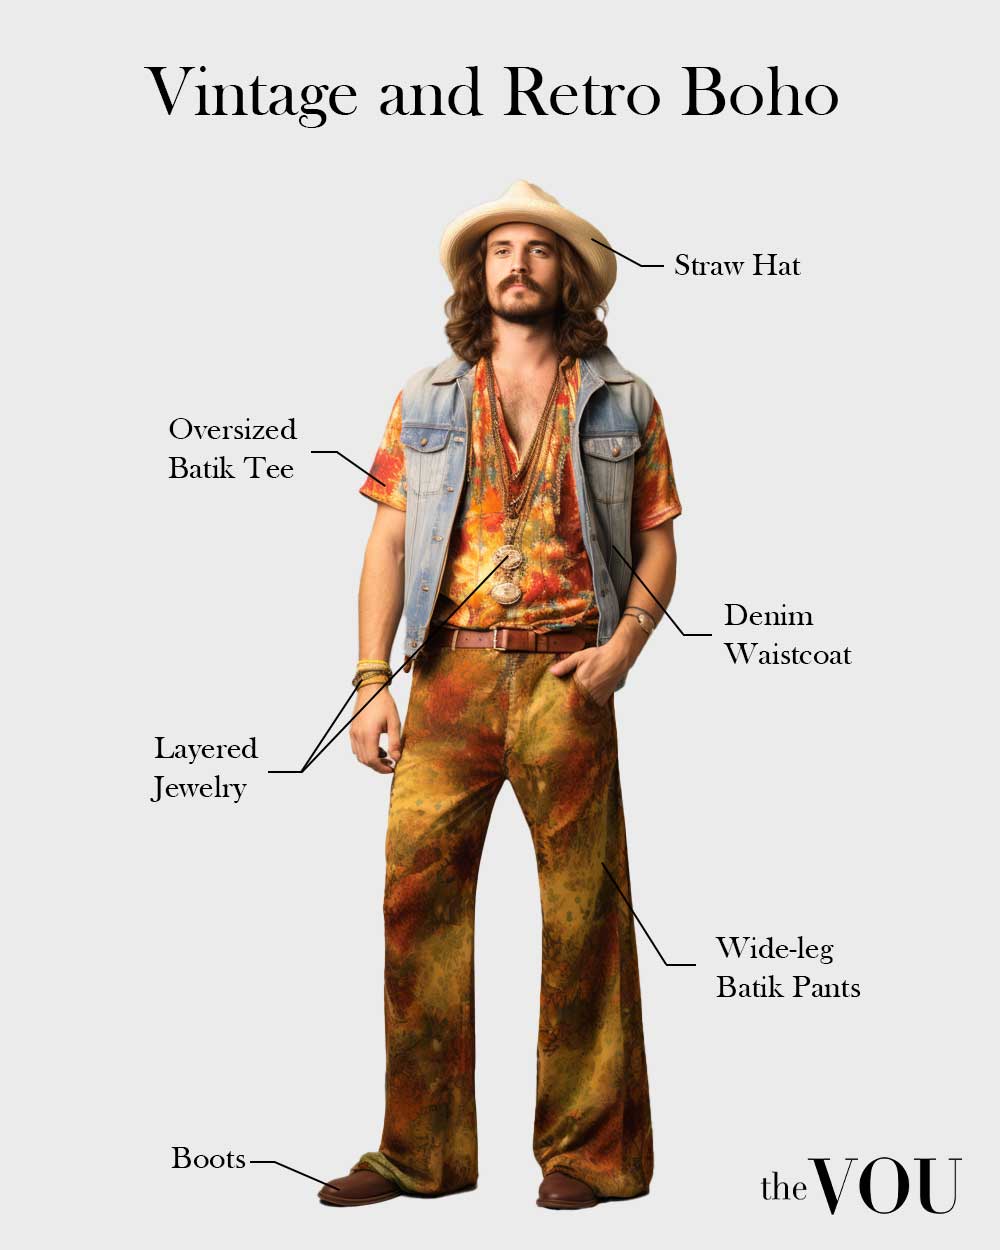 Vintage and Retro Boho outfit for men